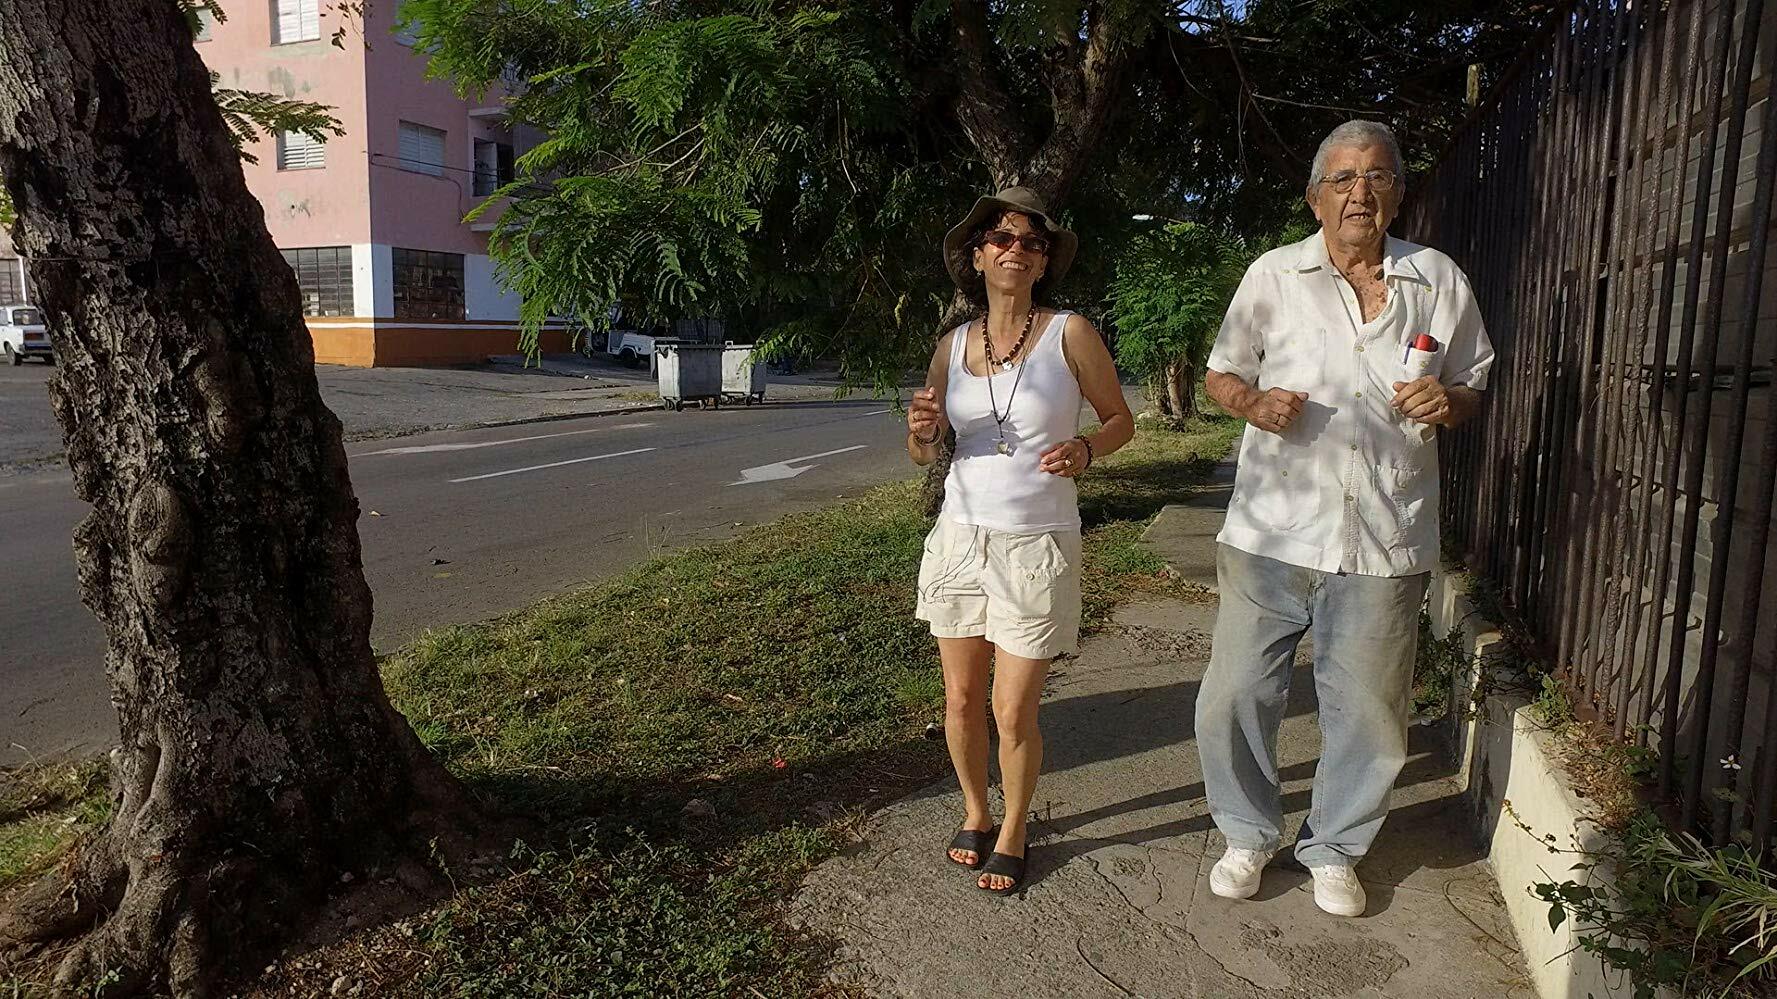 Christiane Arbesu dancing with Mafo, her aunt's ex-husband, in Cuba. COURTESY THE ARTIST